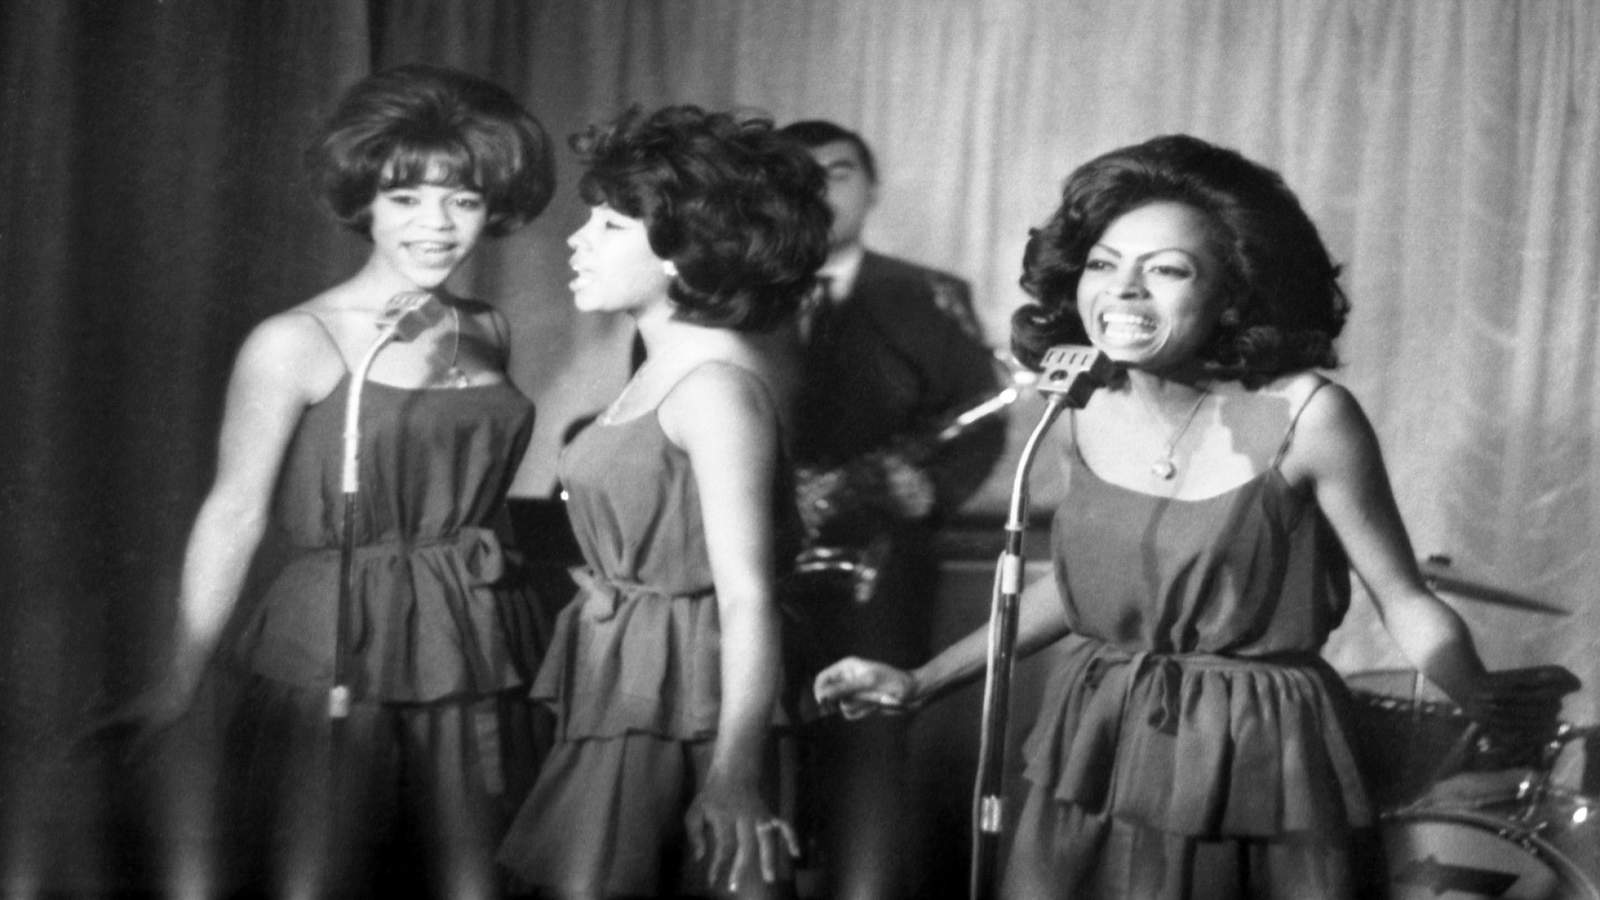 This is the time Mary Wilson and The Supremes rocked out in Houston with Judy Garland